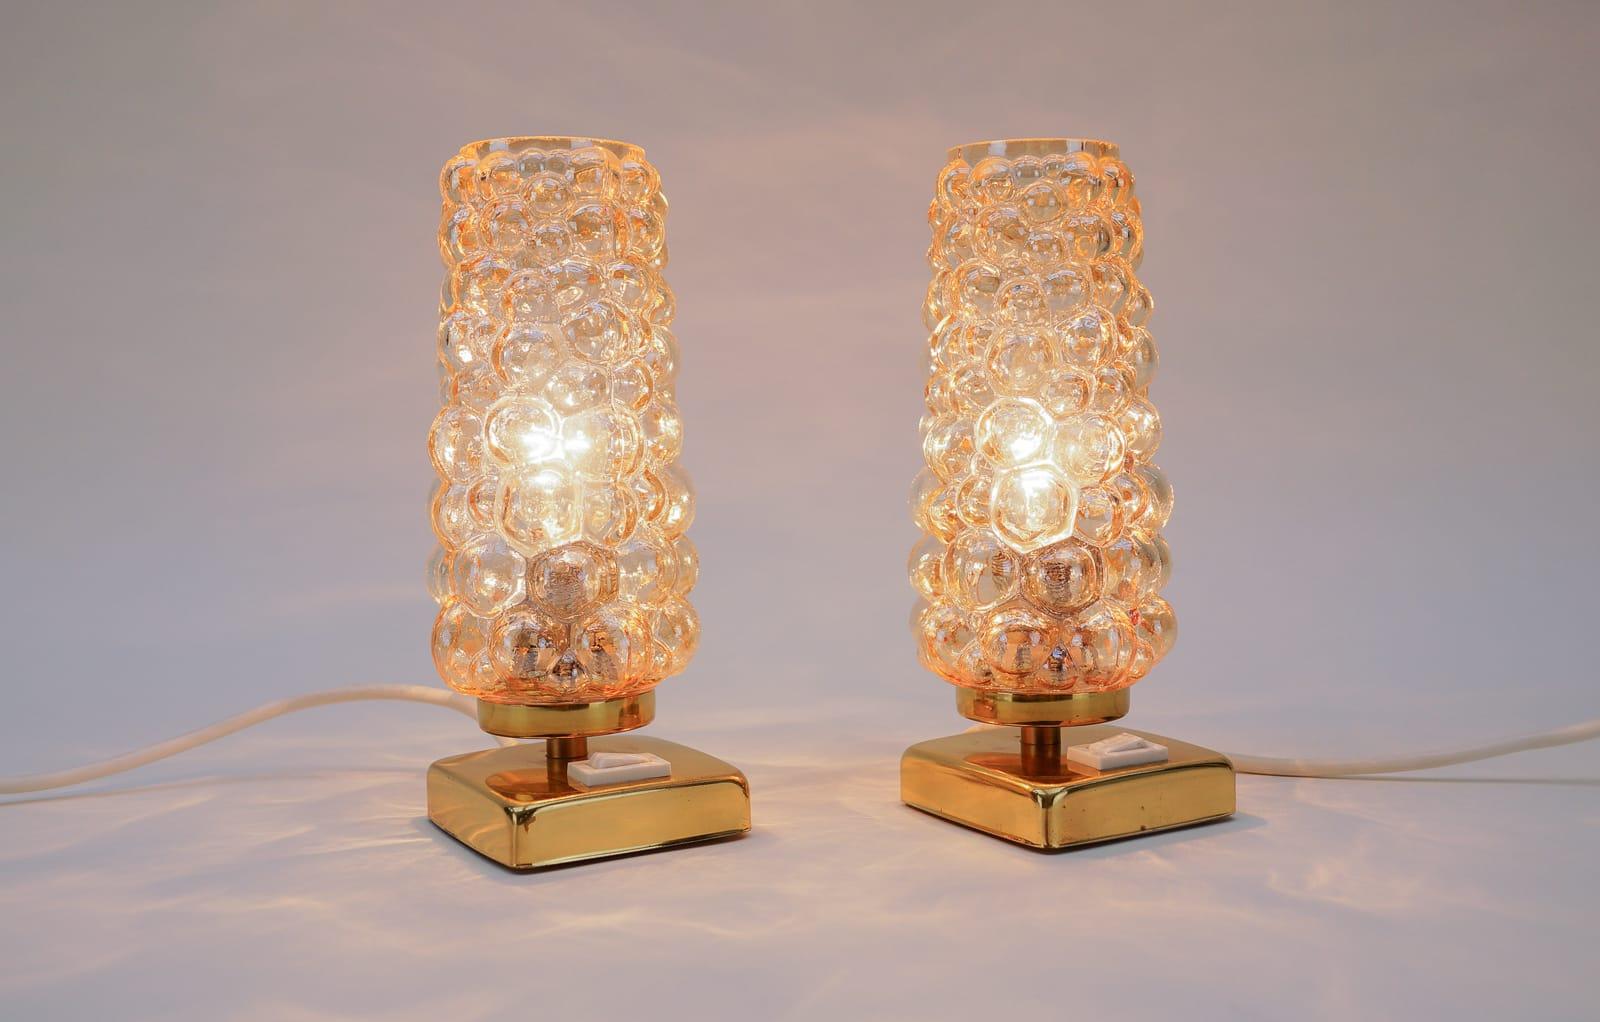 The lamps are executed with E27 Edison screw fit bulbs. It is in working condition. It runs both on 110 / 230 Volt.

Good original vintage condition. Wear consistent with use and age.
  